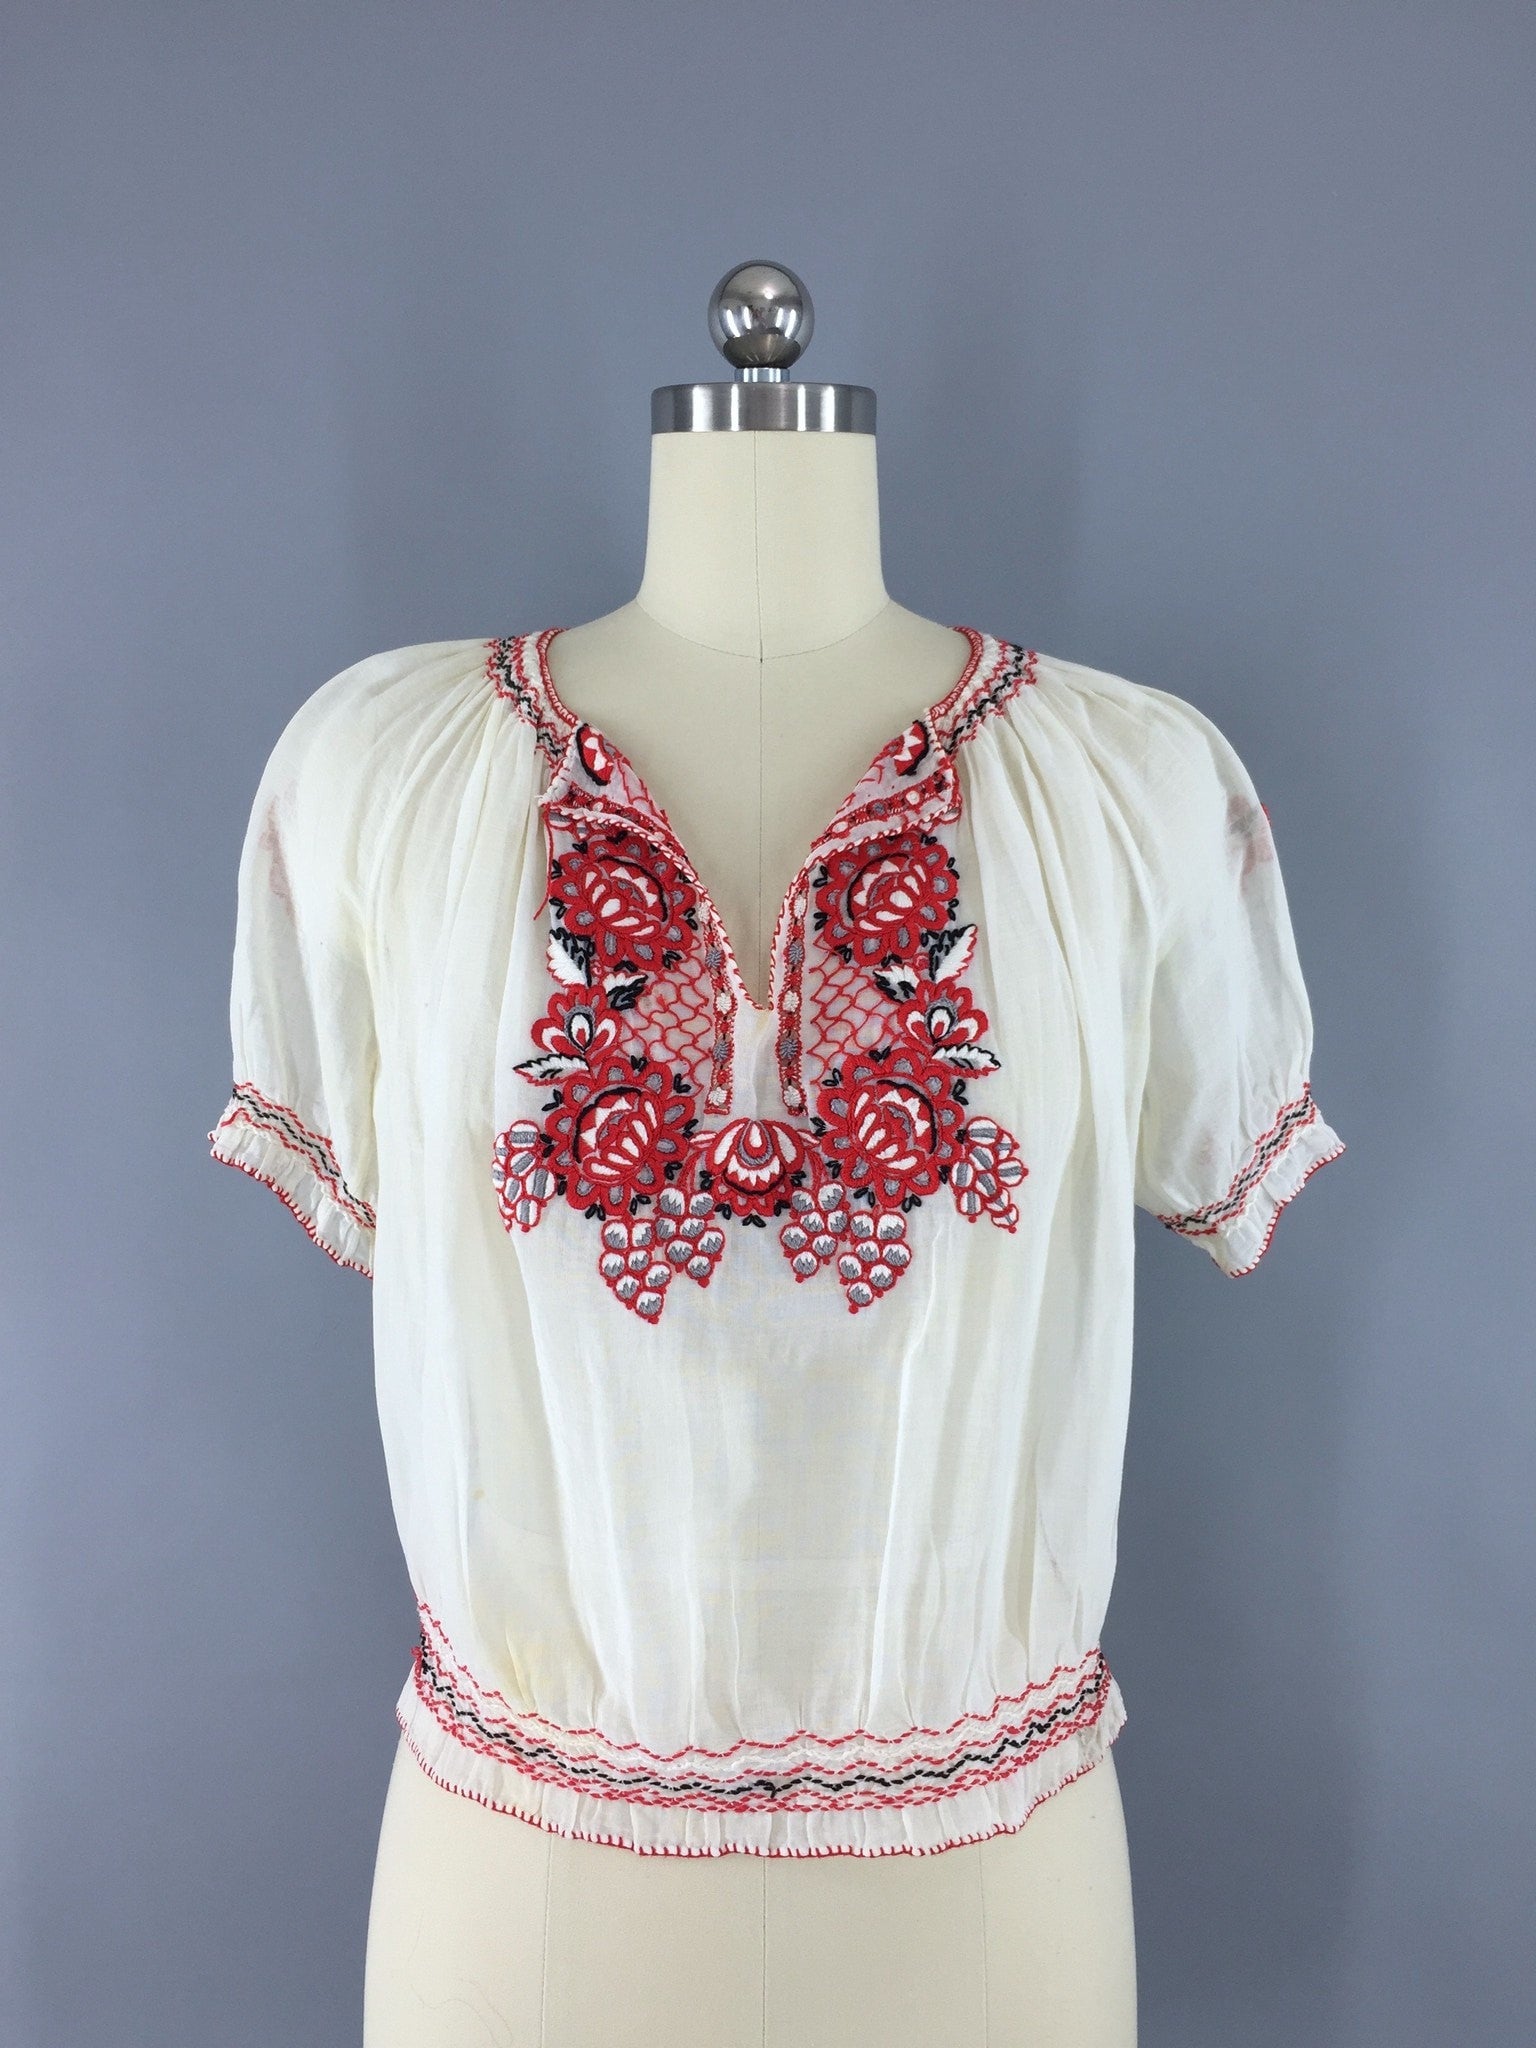 Vintage 1930s Peasant Blouse / Hungarian Embroidered